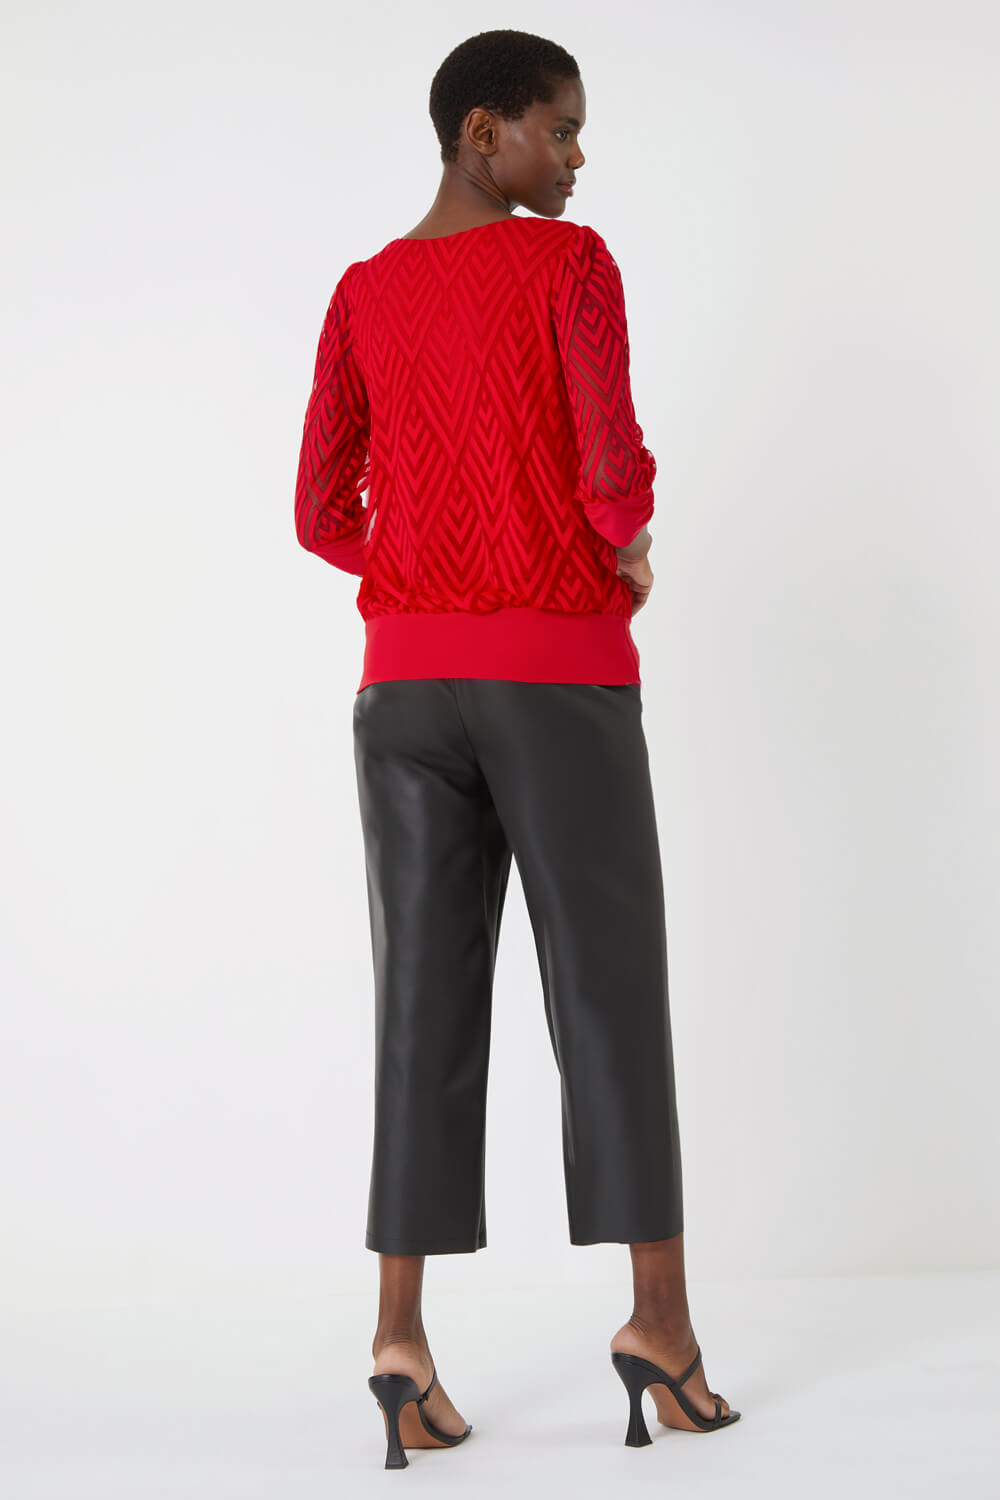 Red Chevron Twist Front Blouson Stretch Top, Image 3 of 5